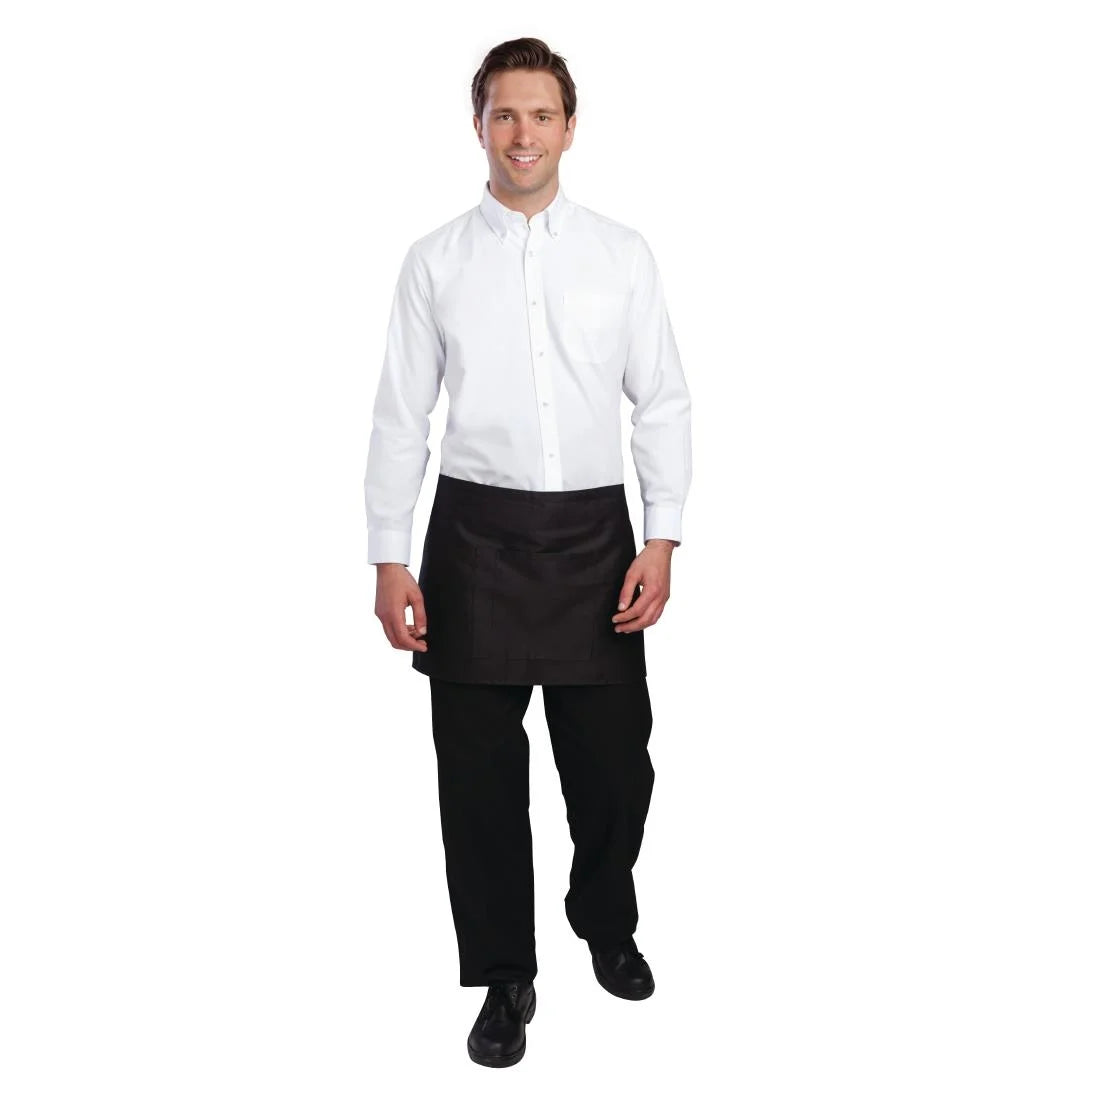 Chef Works Oxford Button Down Collar Shirt White JD Catering Equipment Solutions Ltd